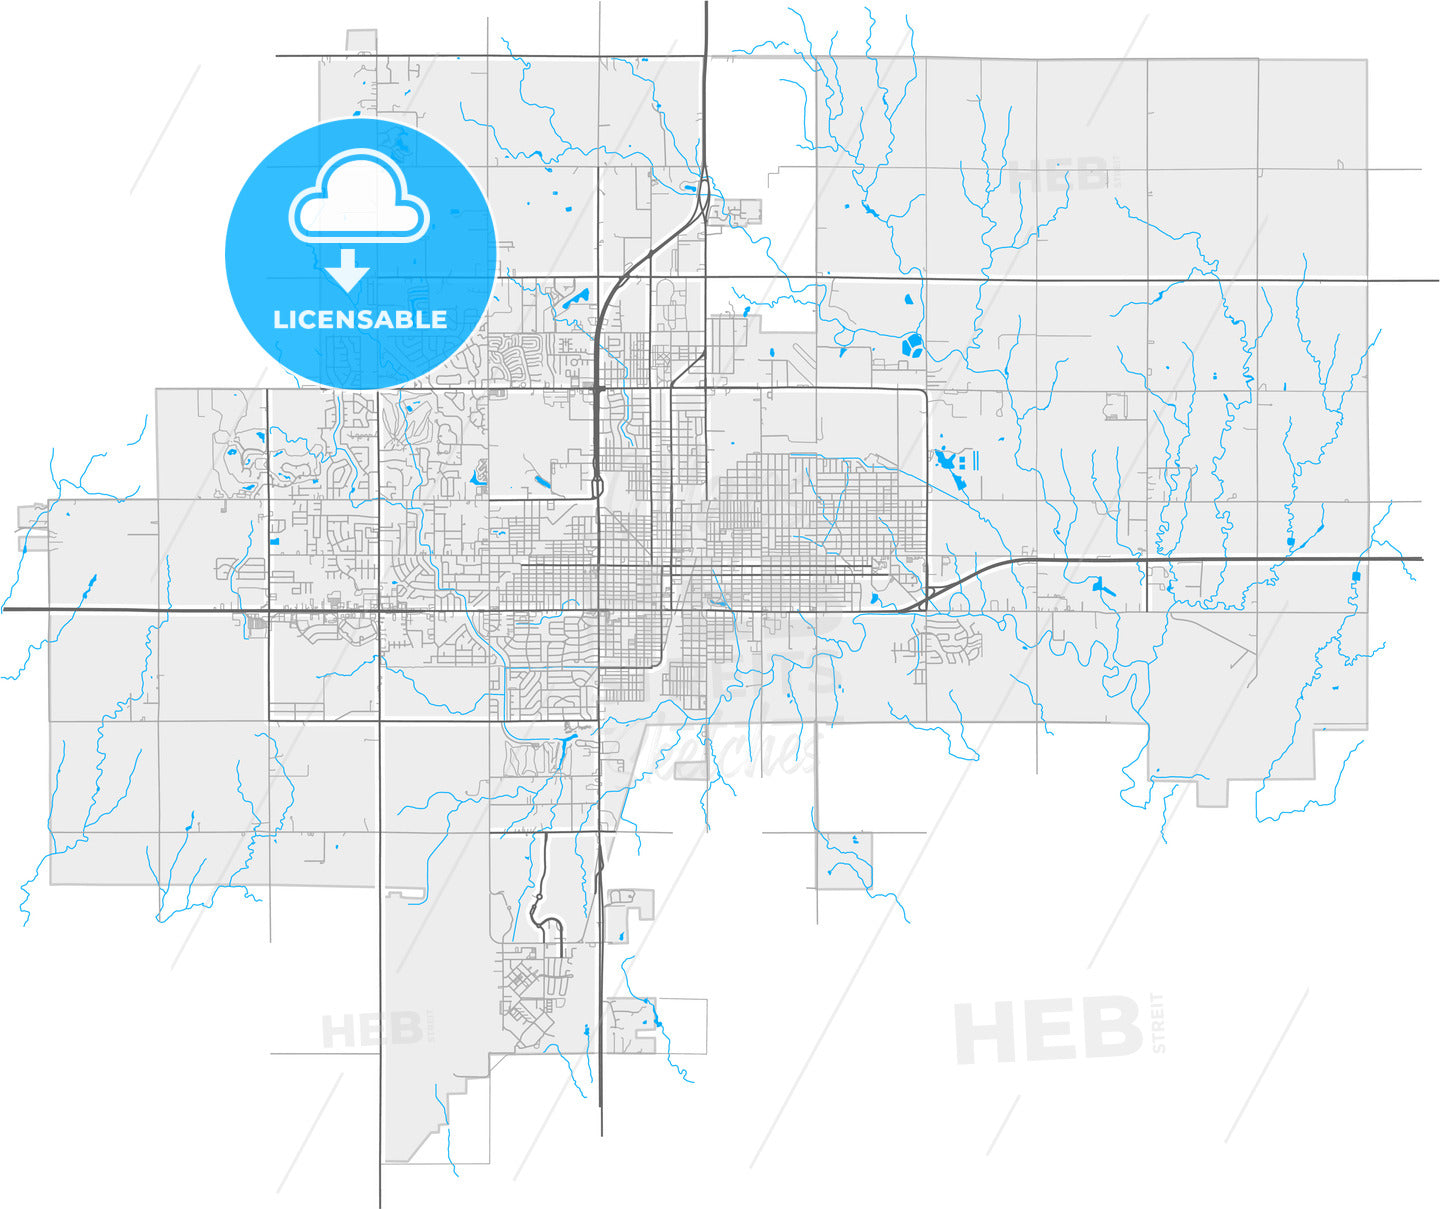 Enid, Oklahoma, United States, high quality vector map